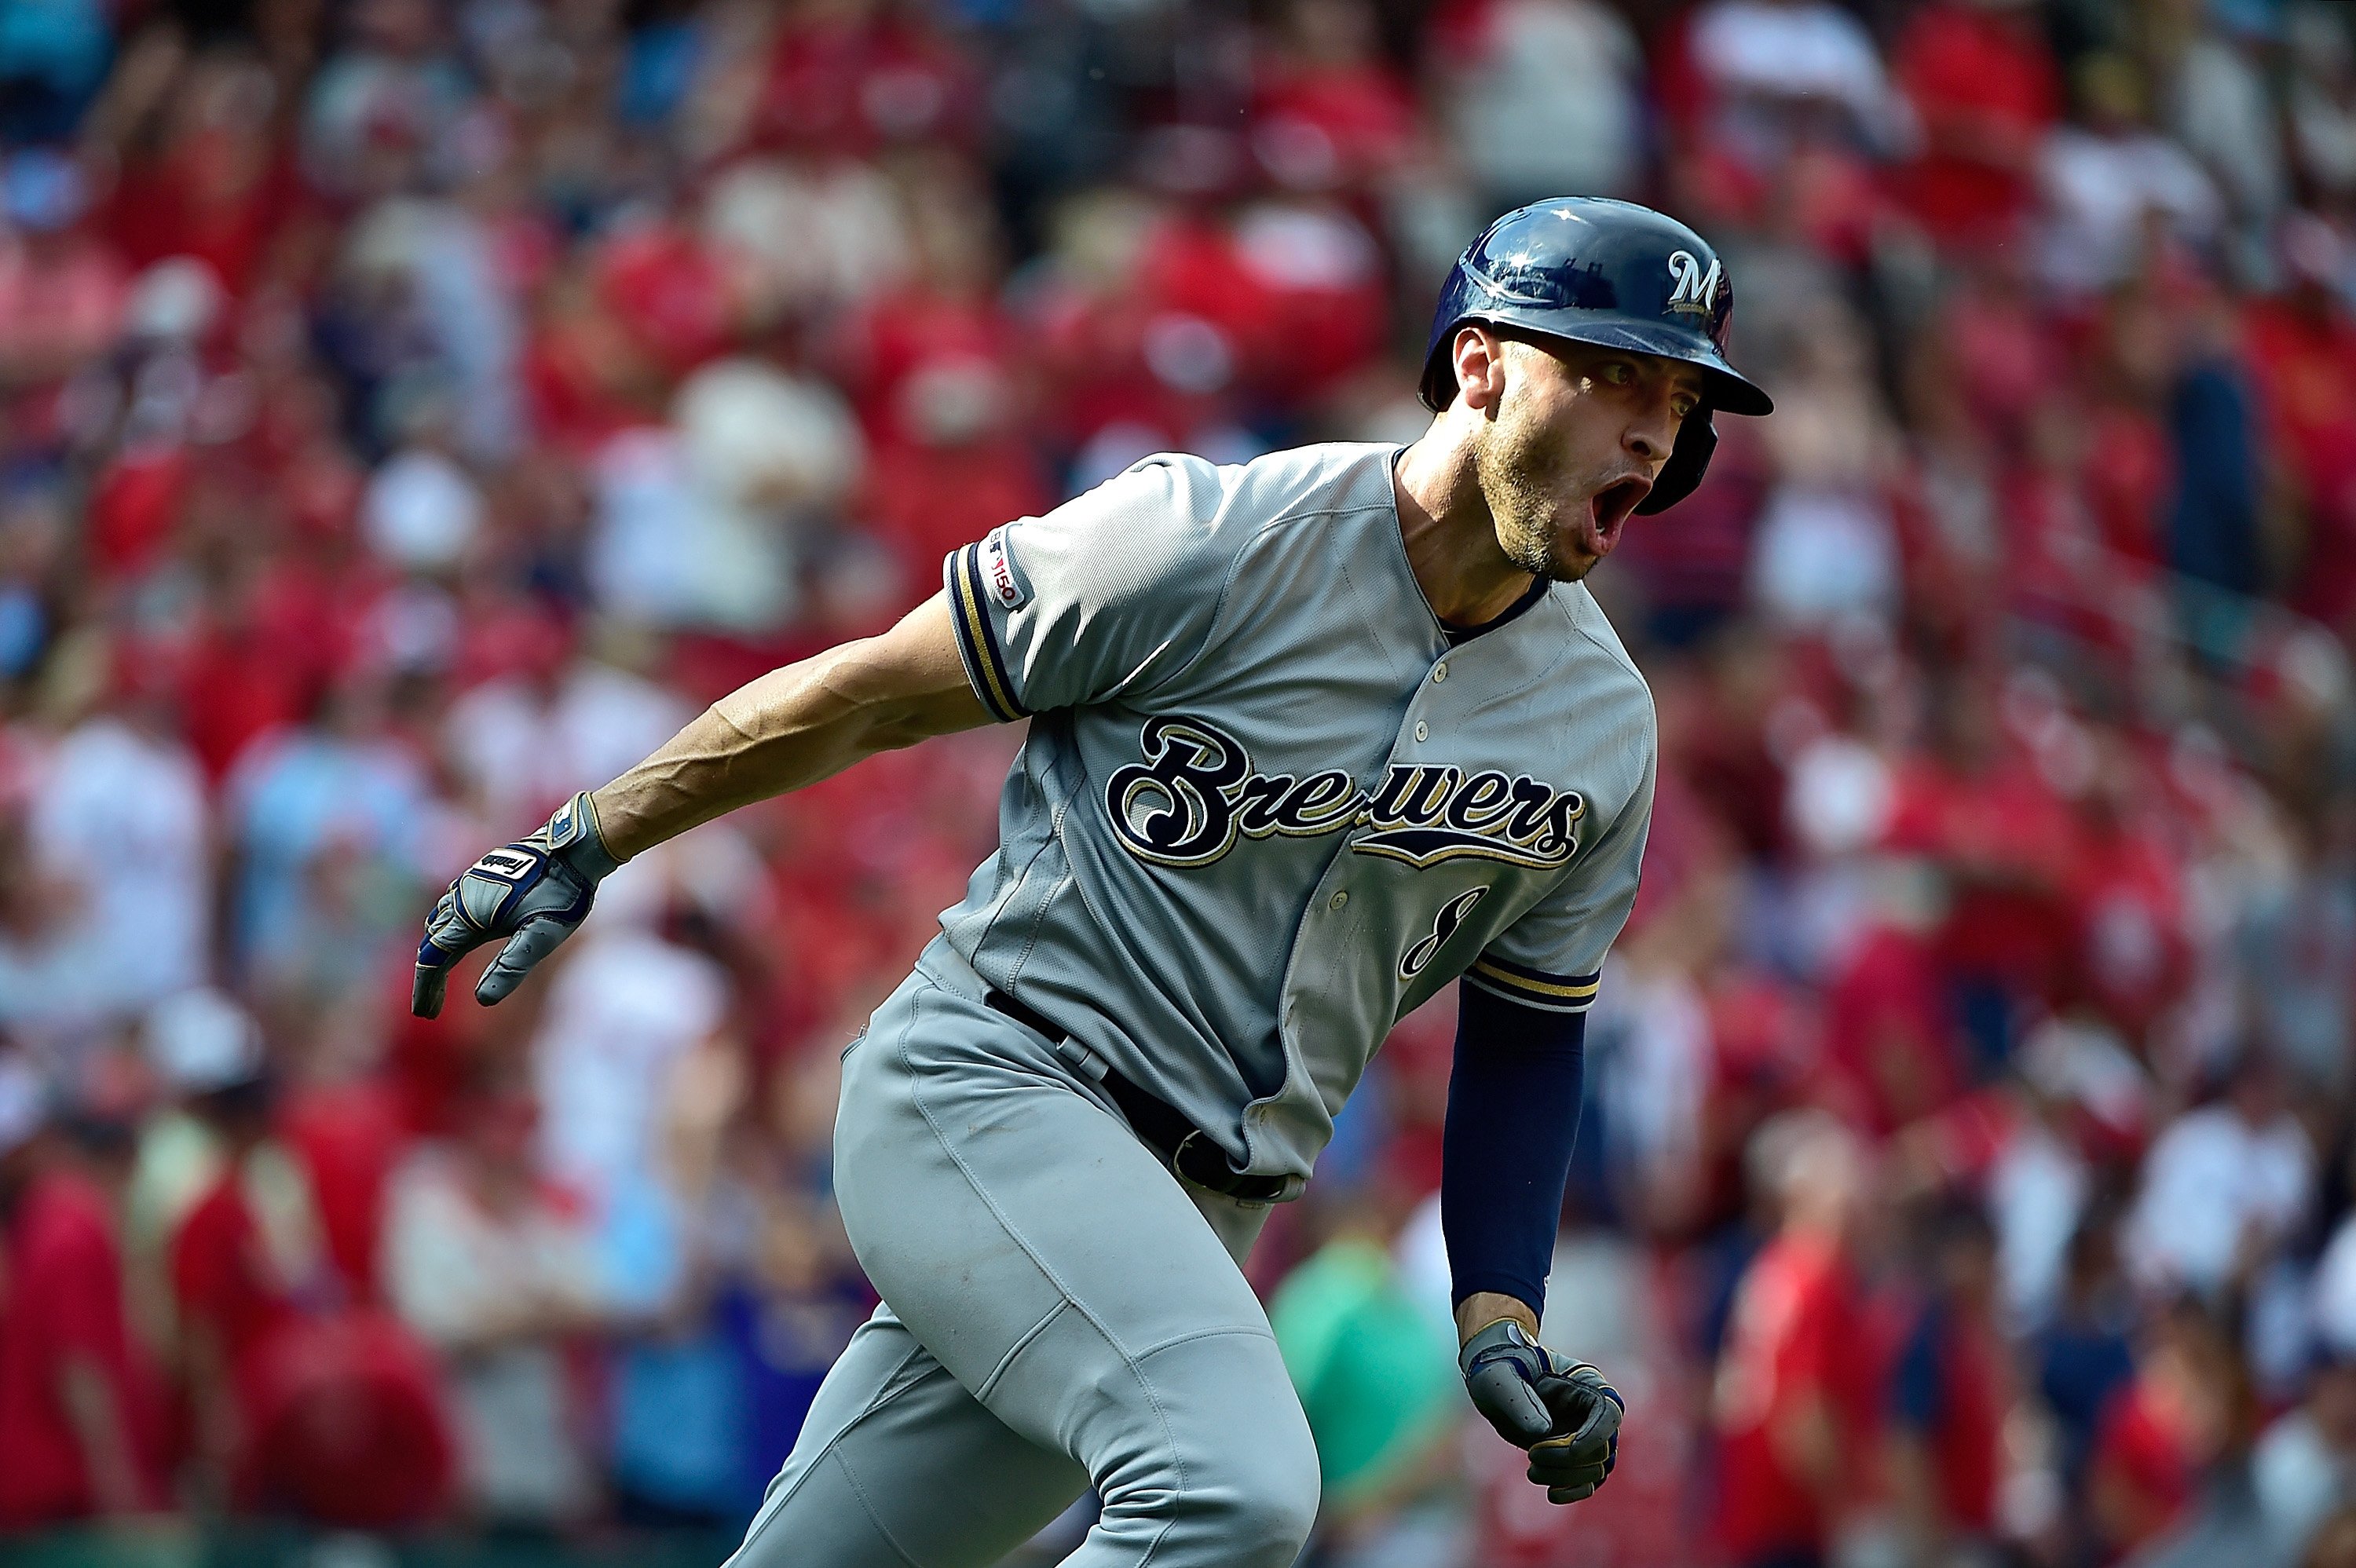 Baseball Reference on "Ryan Braun is the fifth player in our database* hit a go-ahead grand slam in the 9th a 3-2 count and 2 outs https://t.co/UMTUusRaMX *Note